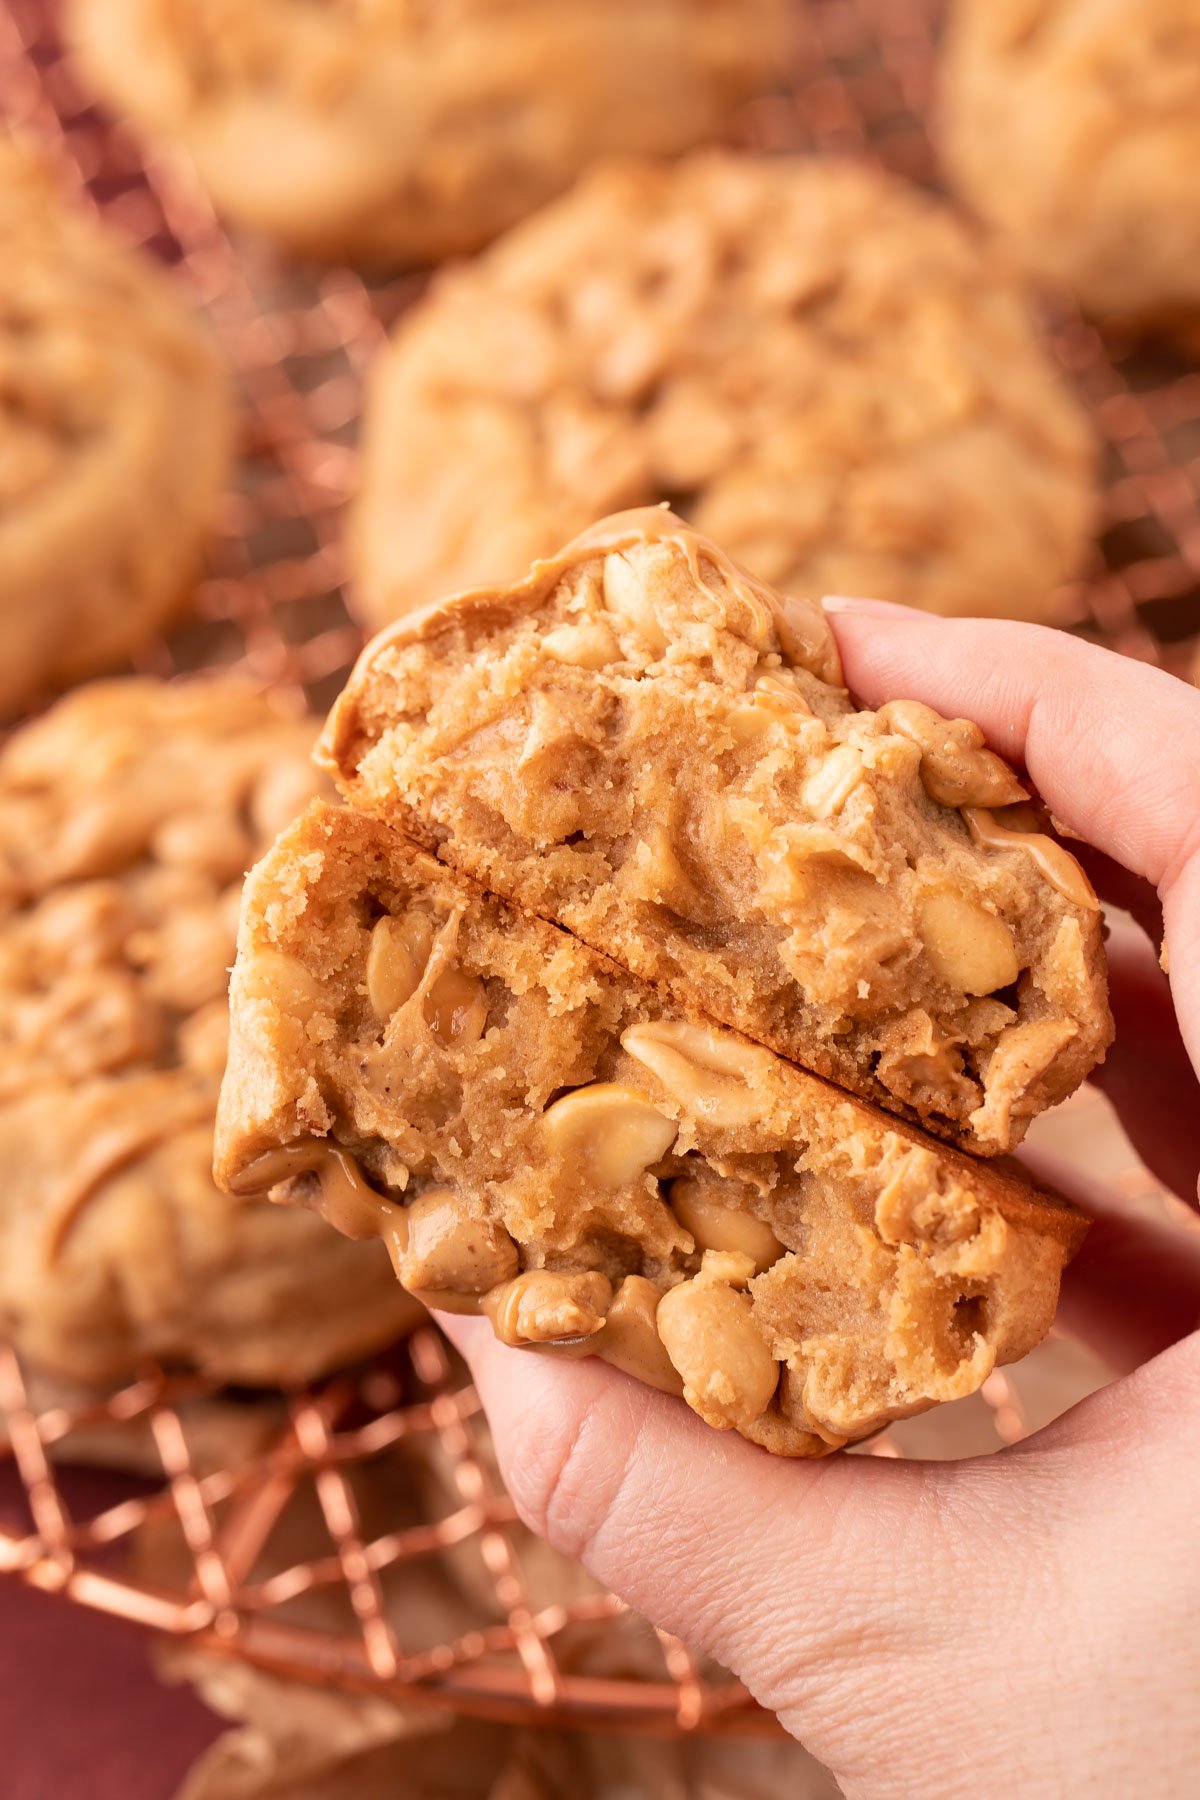 A woman's hand holding two halves of a triple peanut butter cookie to reveal the inside.